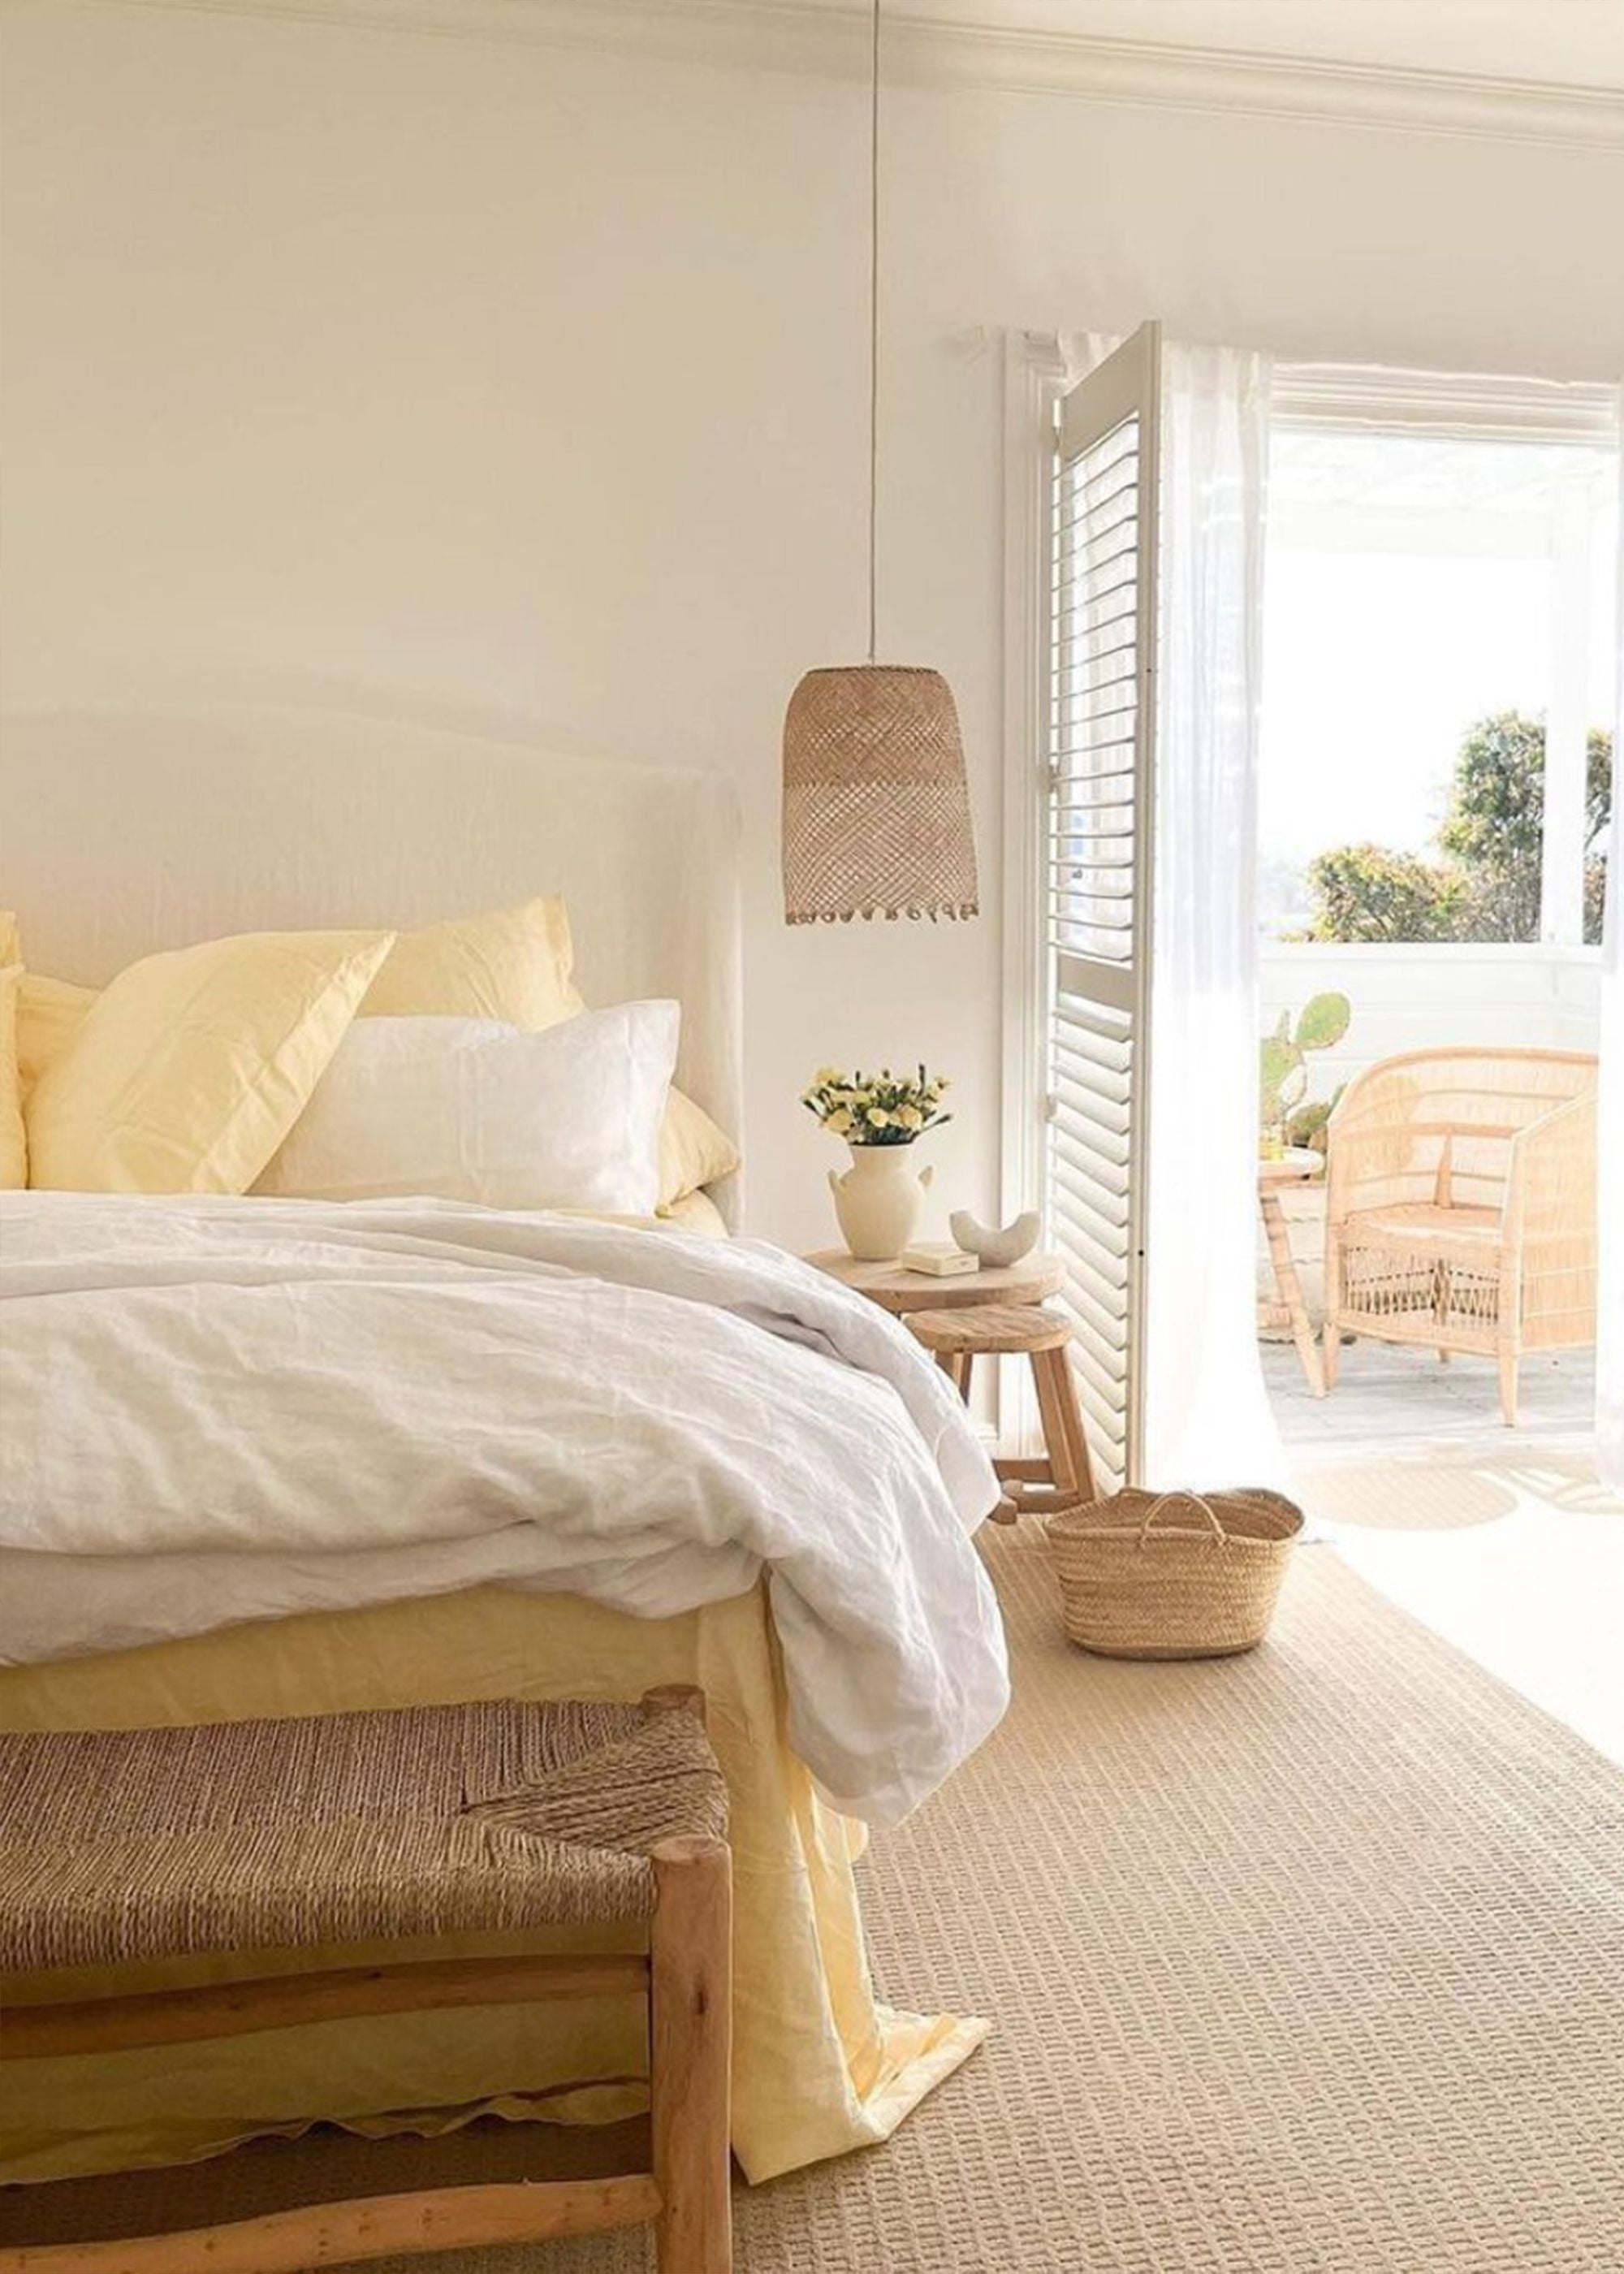 Just Moved In? These 8 Decor Essentials Will Make It Feel Like a Home – Bed  Threads